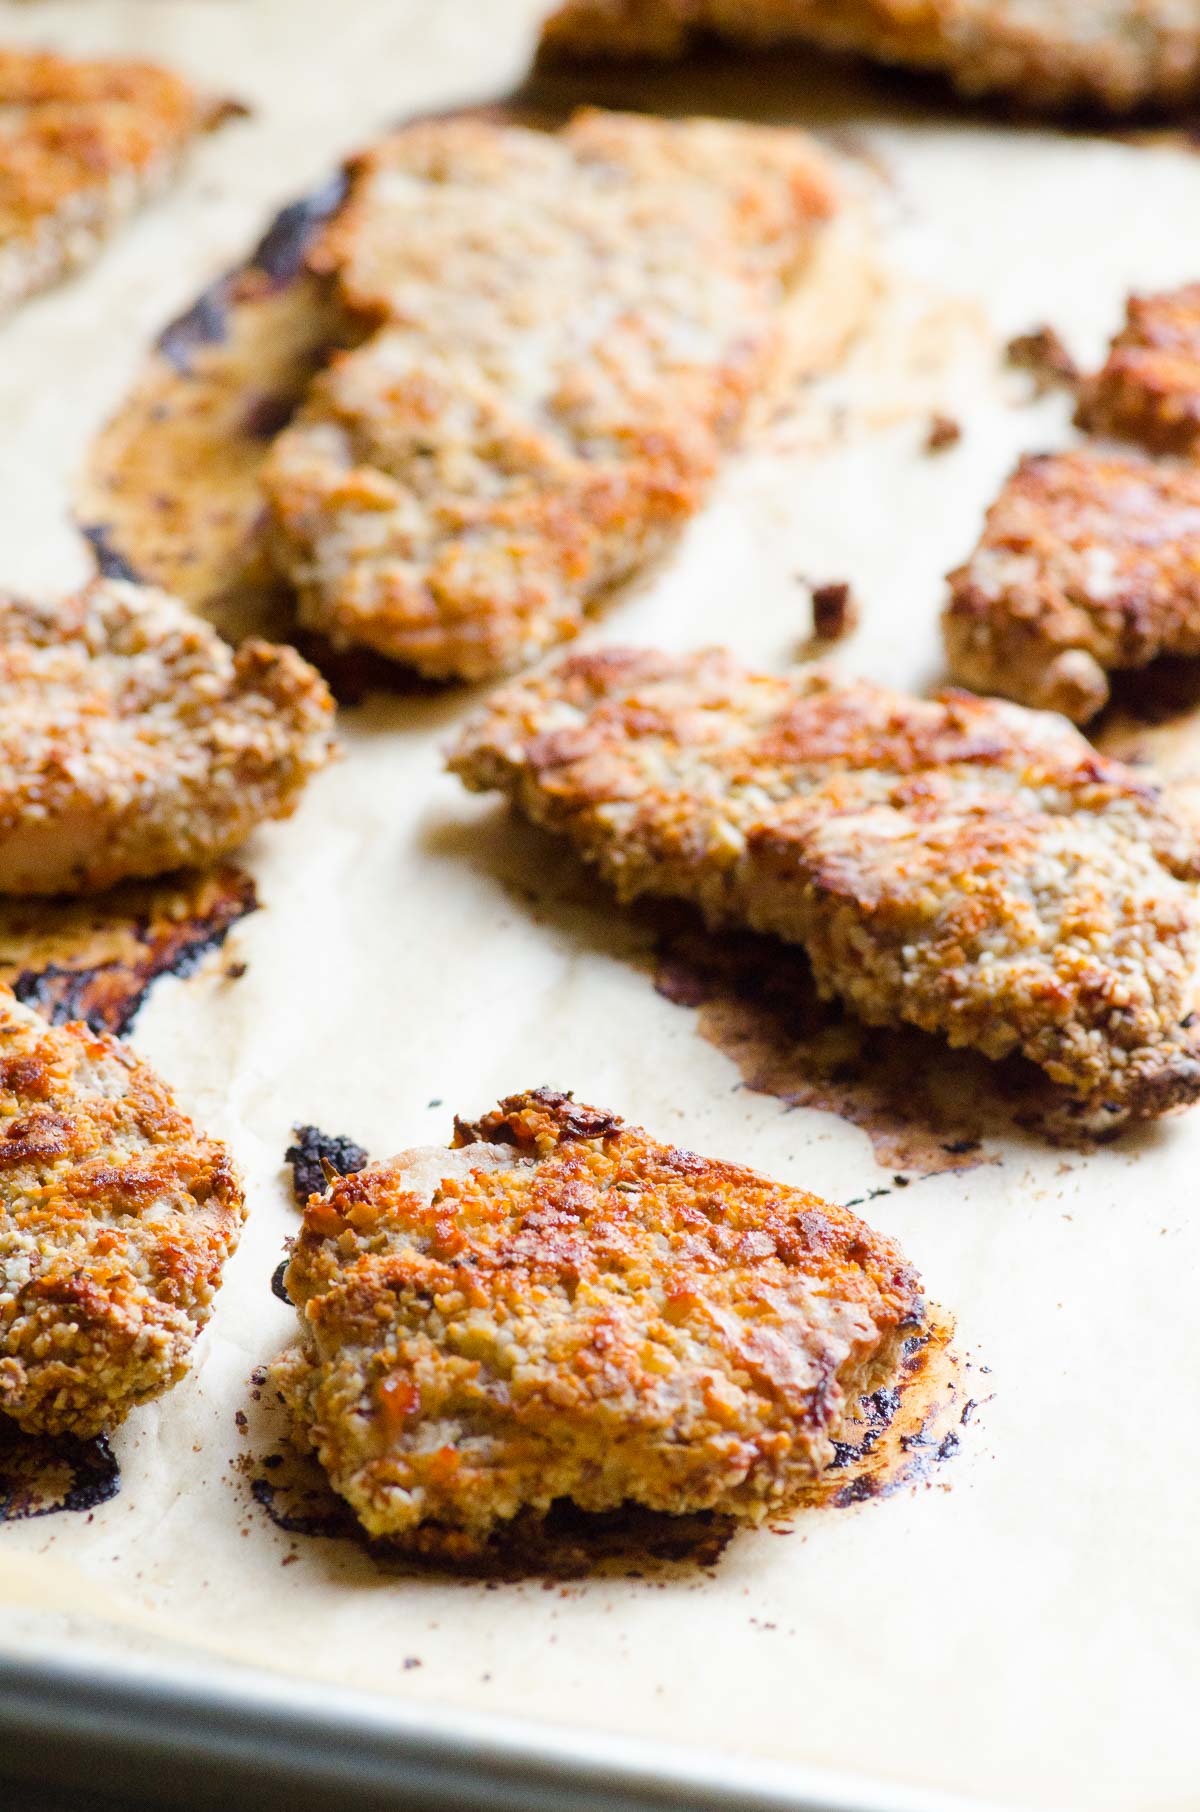 Baked almond crusted chicken tenders on baking sheet.